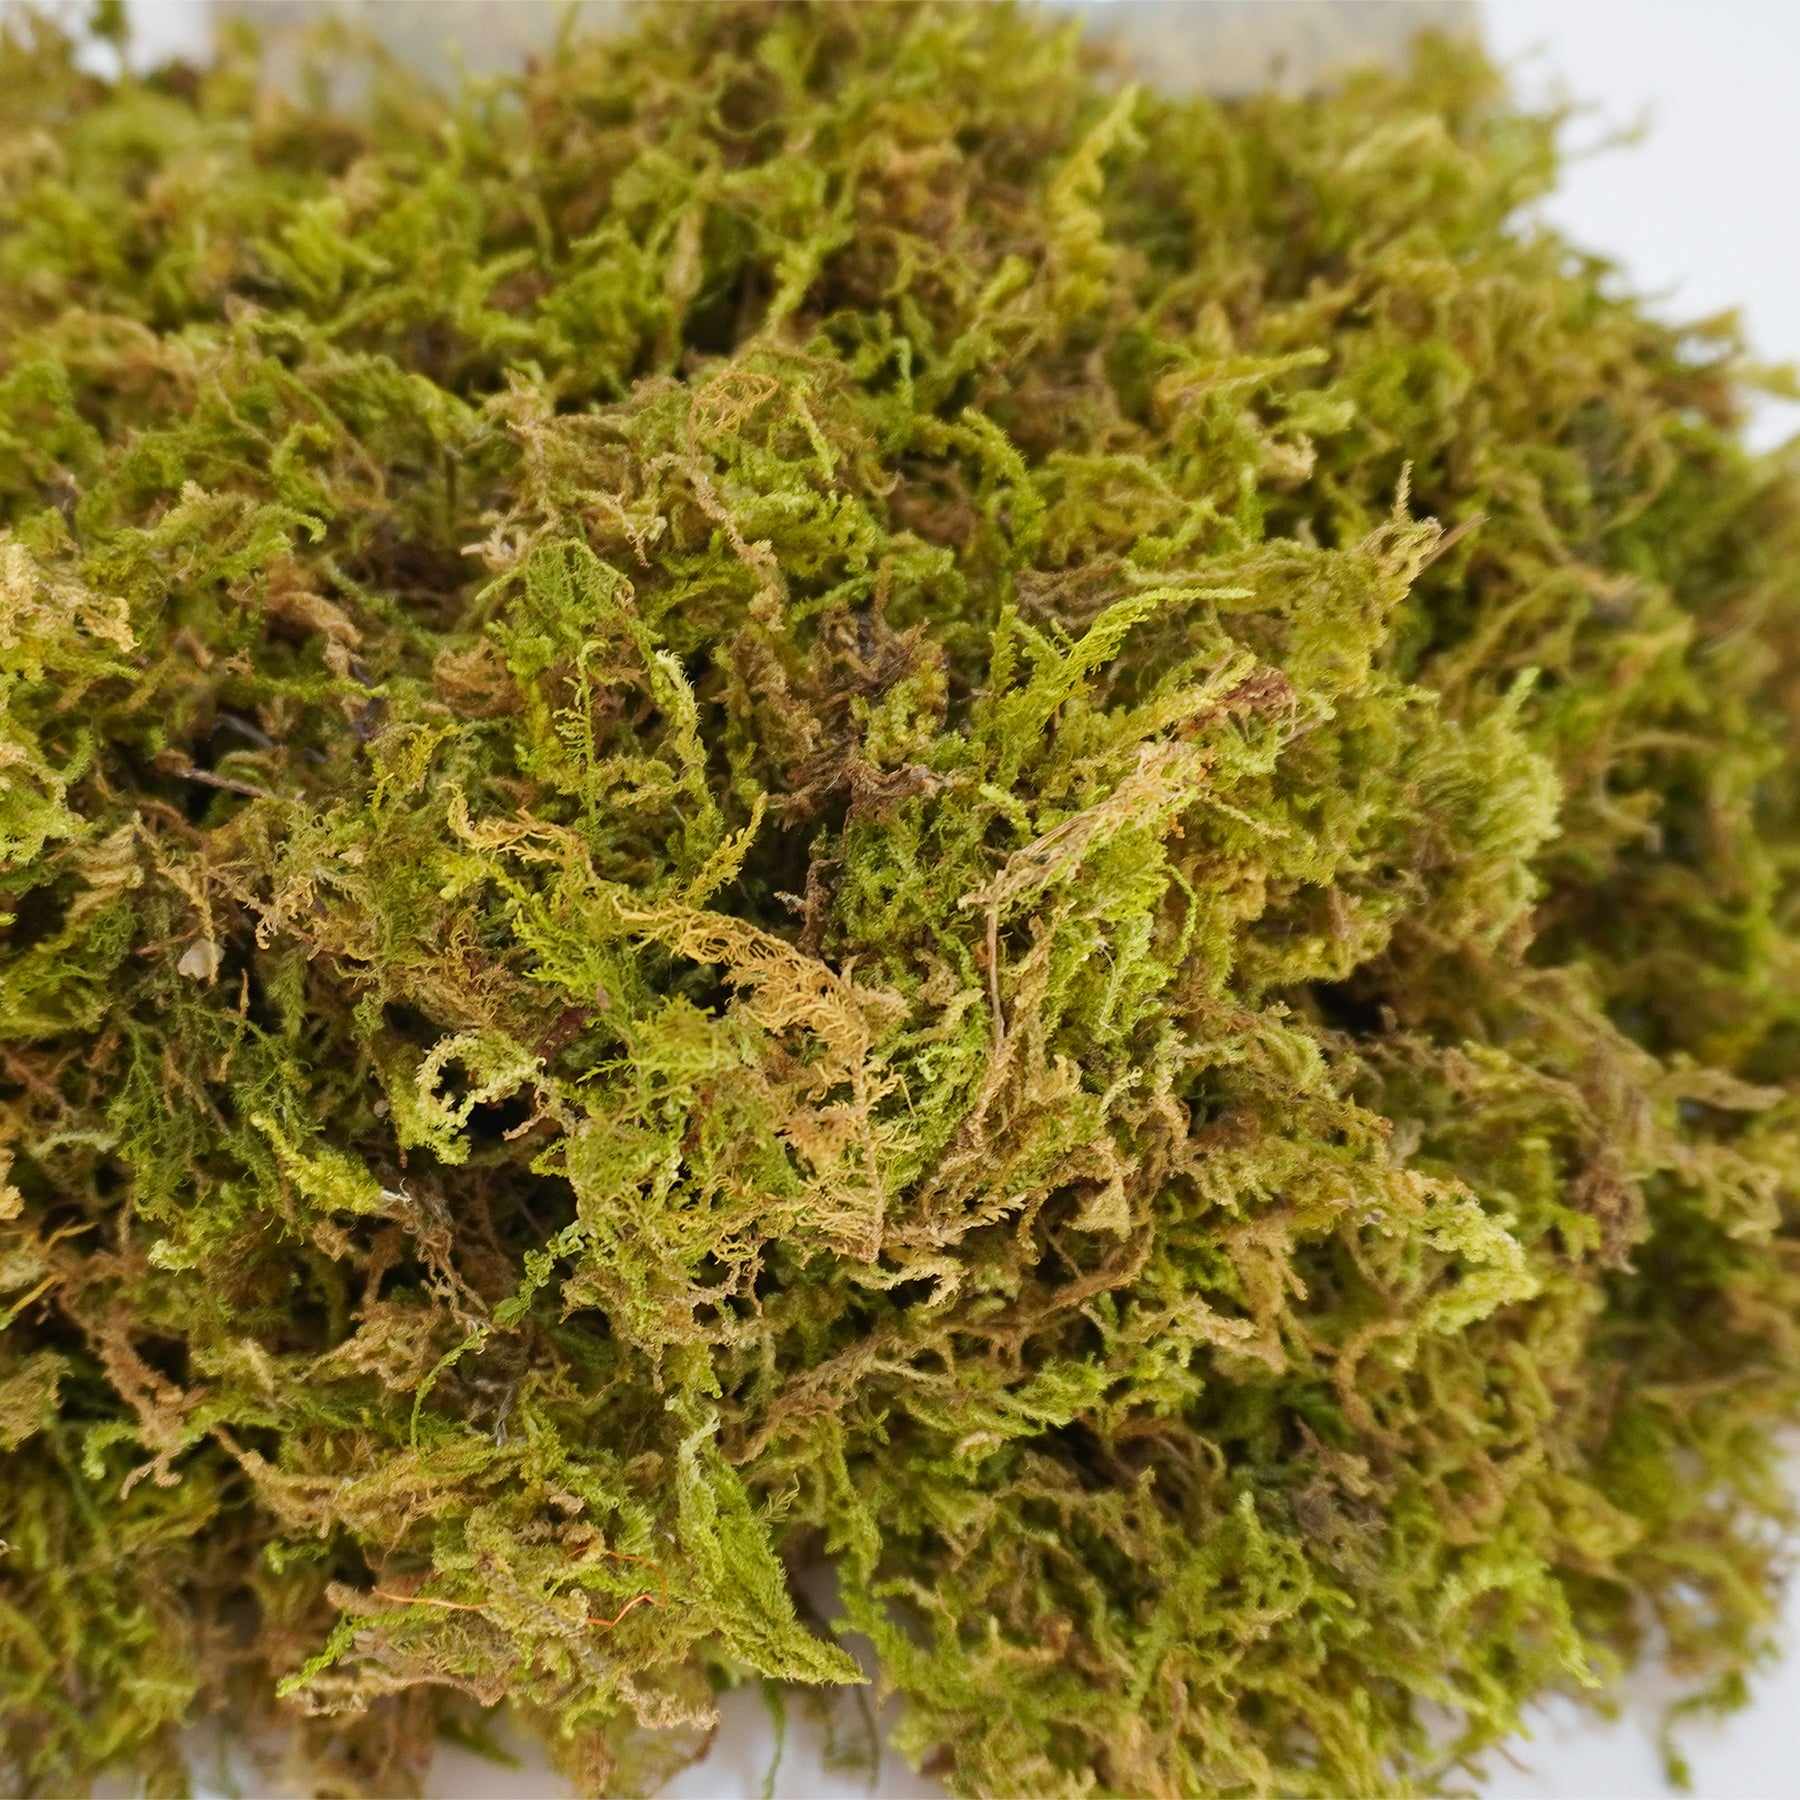 Begeterday 6.5oz Pure Natural Reptile Moss for Humidity, Great for Snakes, Turtle and Other Reptiles, Good for Terrariums for Reptiles & amphibians